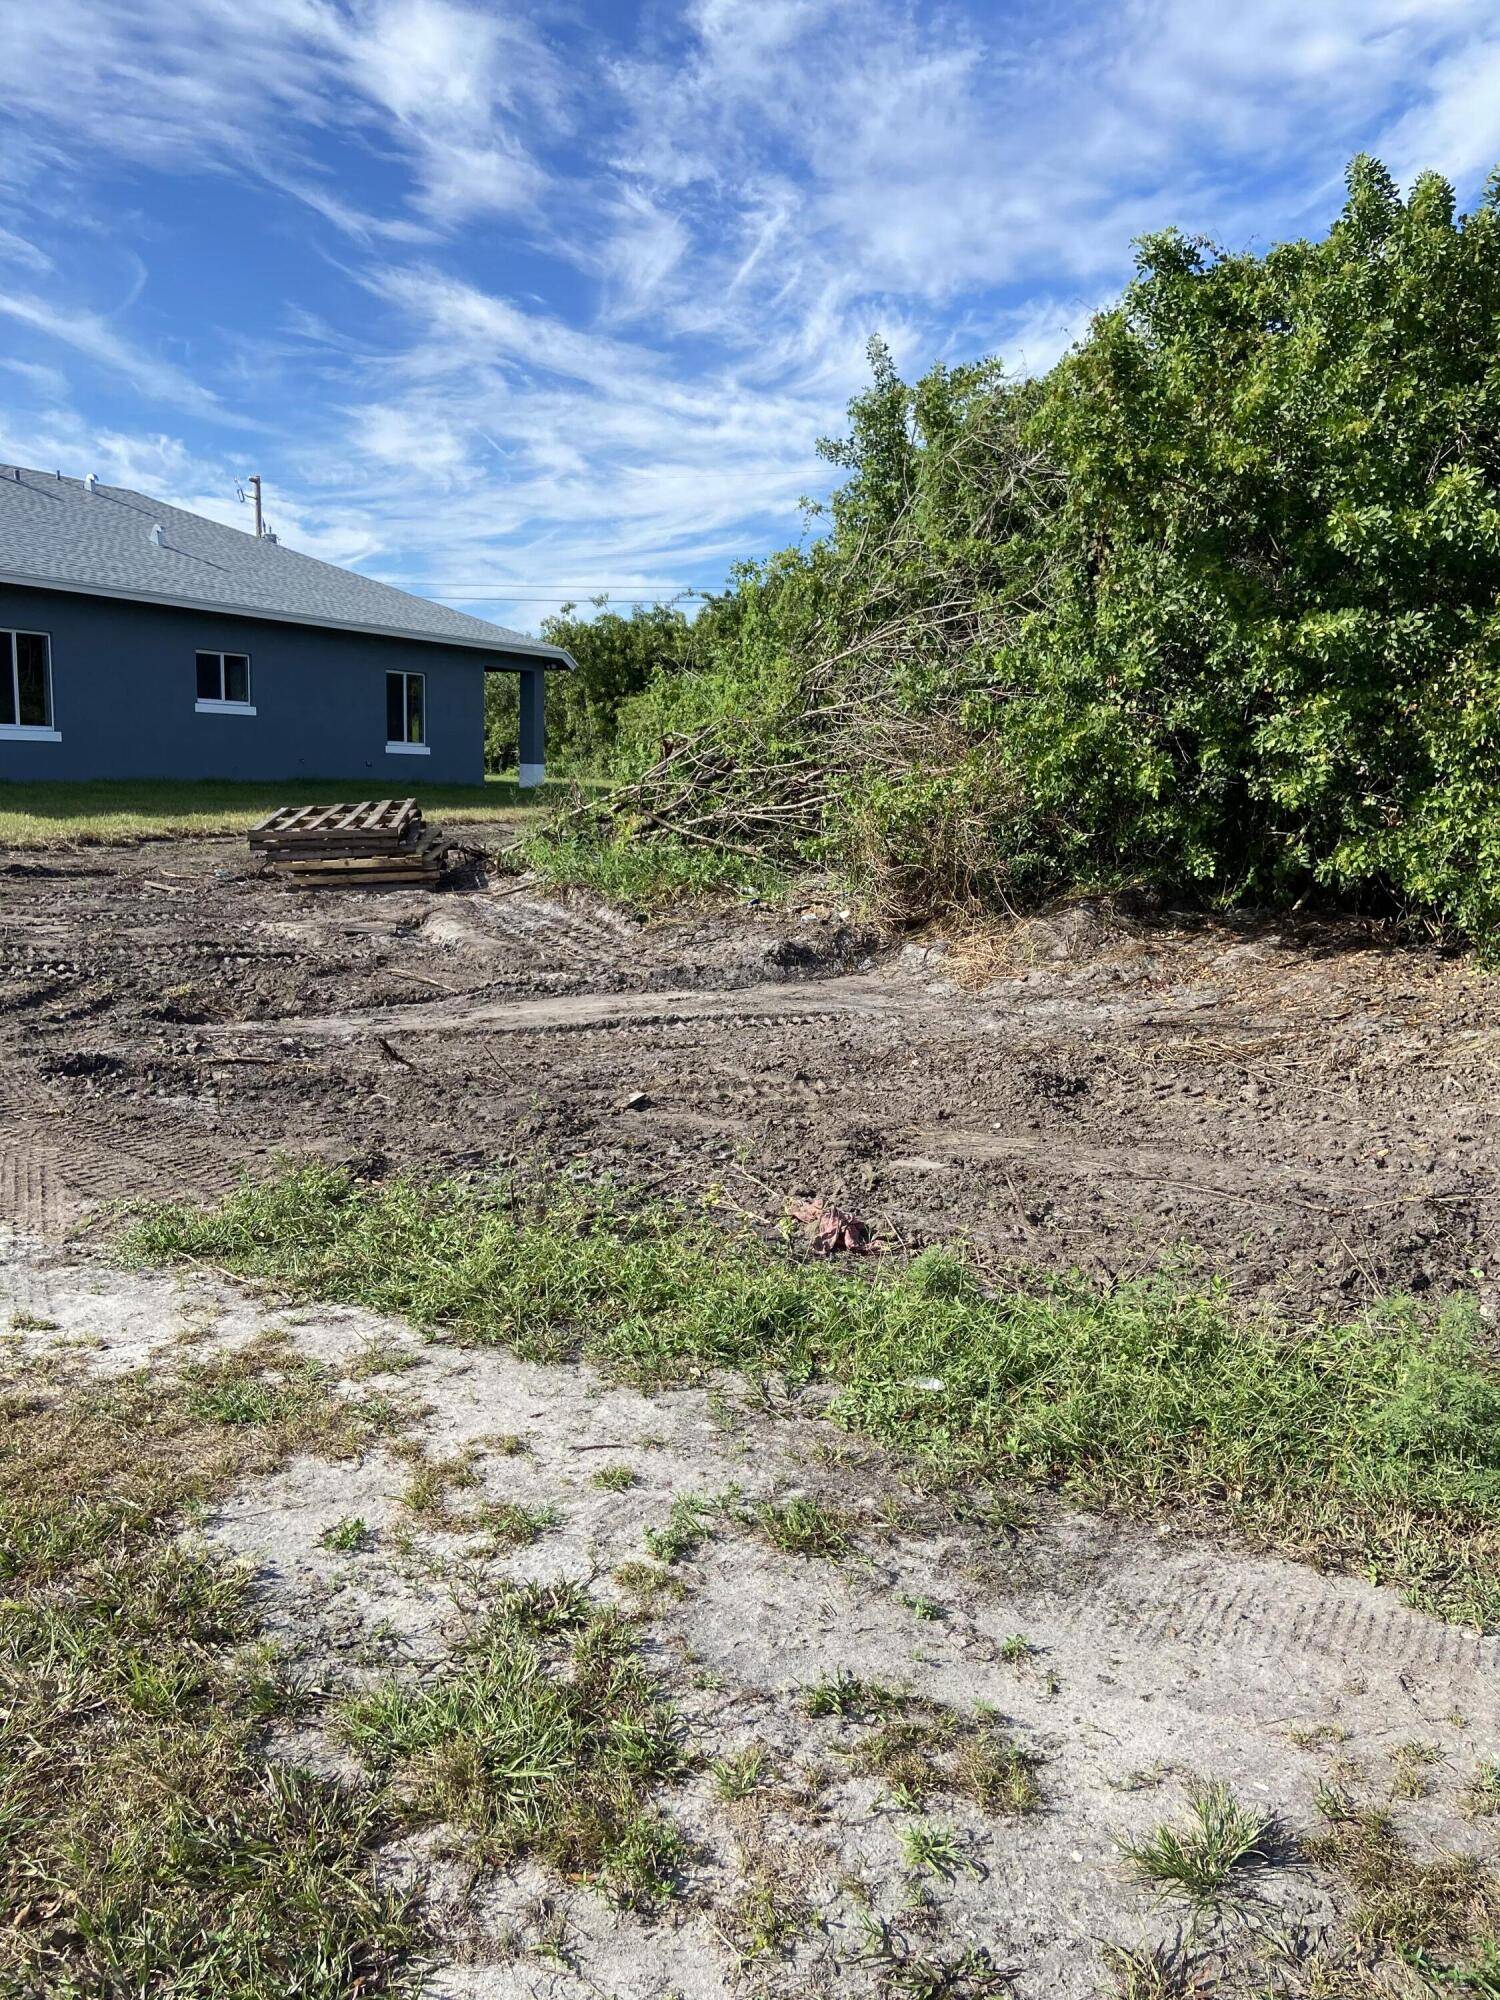 Beaches minutes away. Build your dream home on this piece of Paradise in Heavenly Port St Lucie.